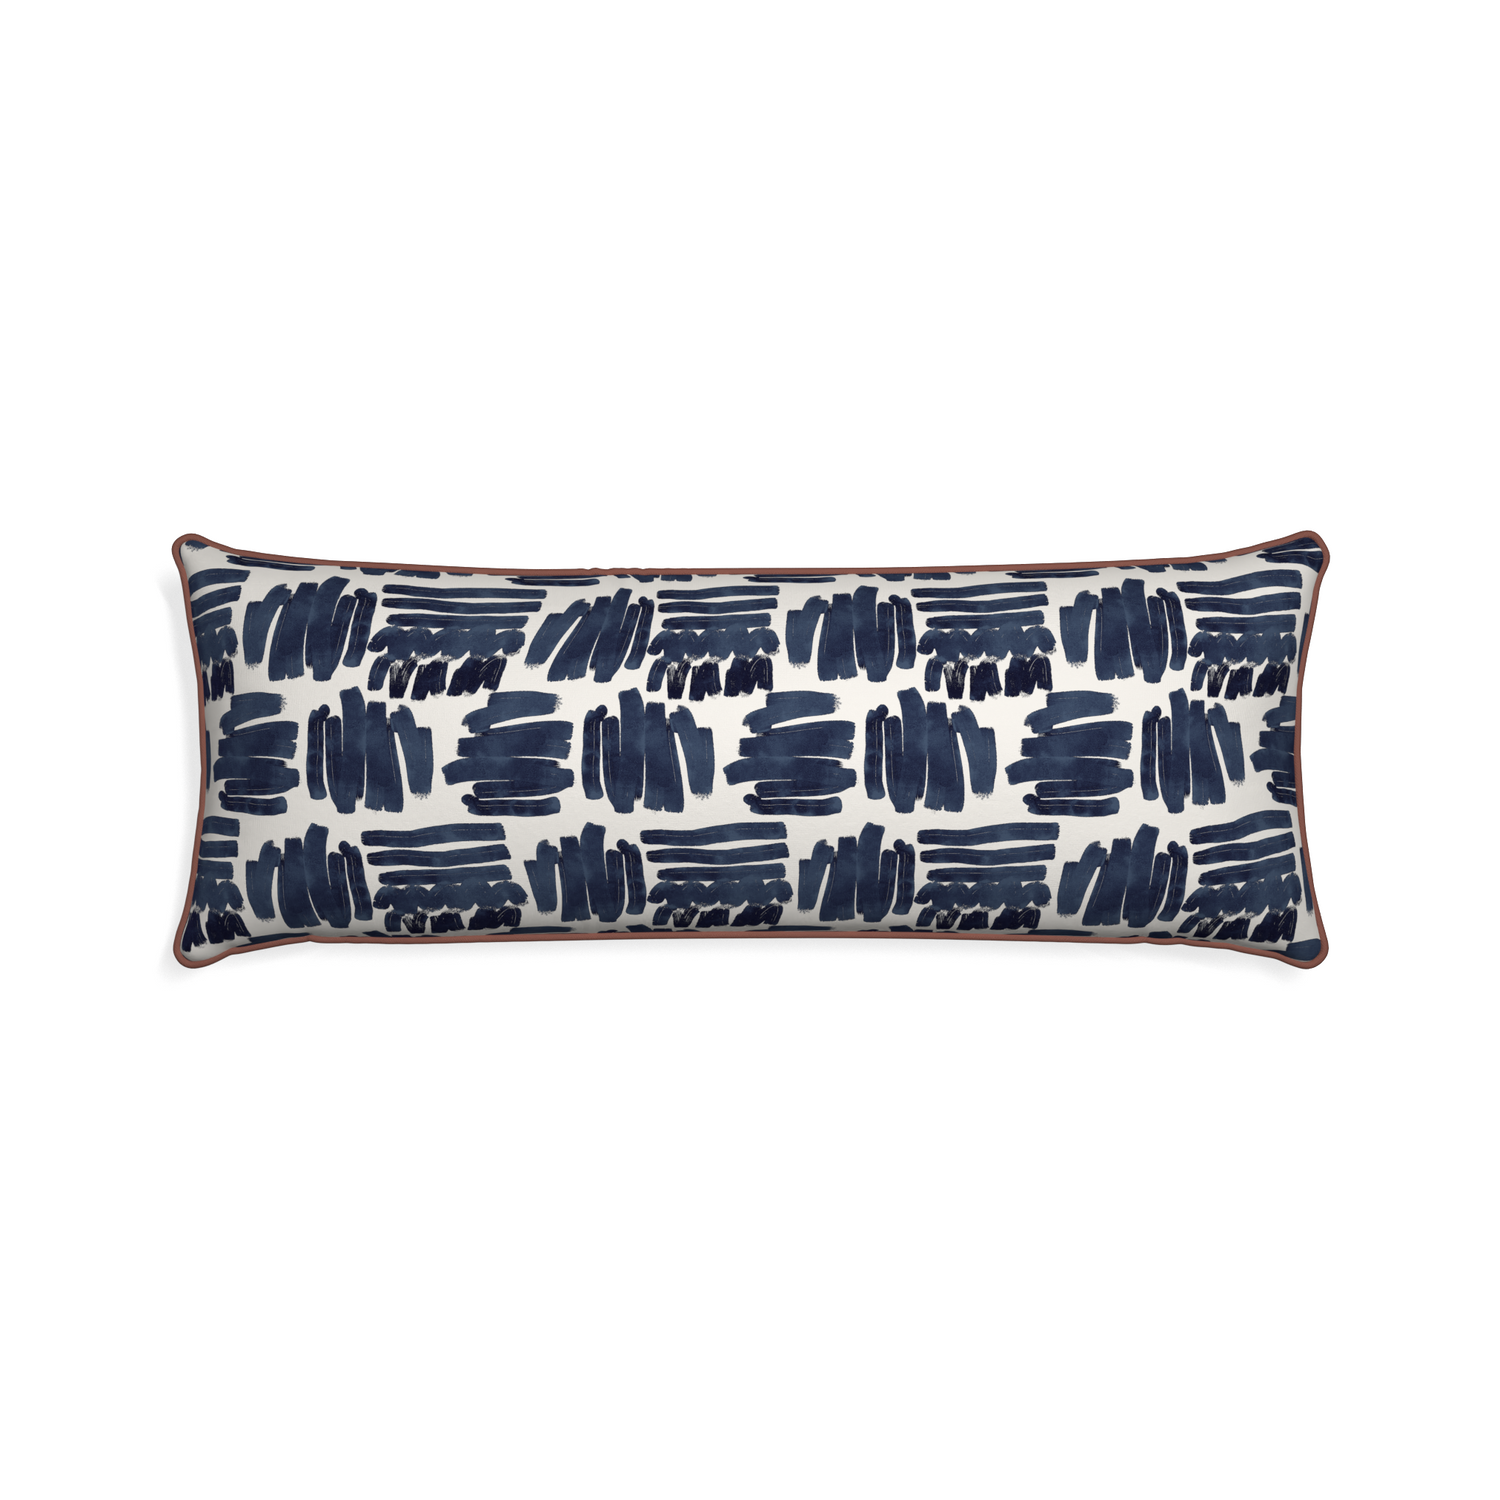 Xl-lumbar warby custom pillow with w piping on white background